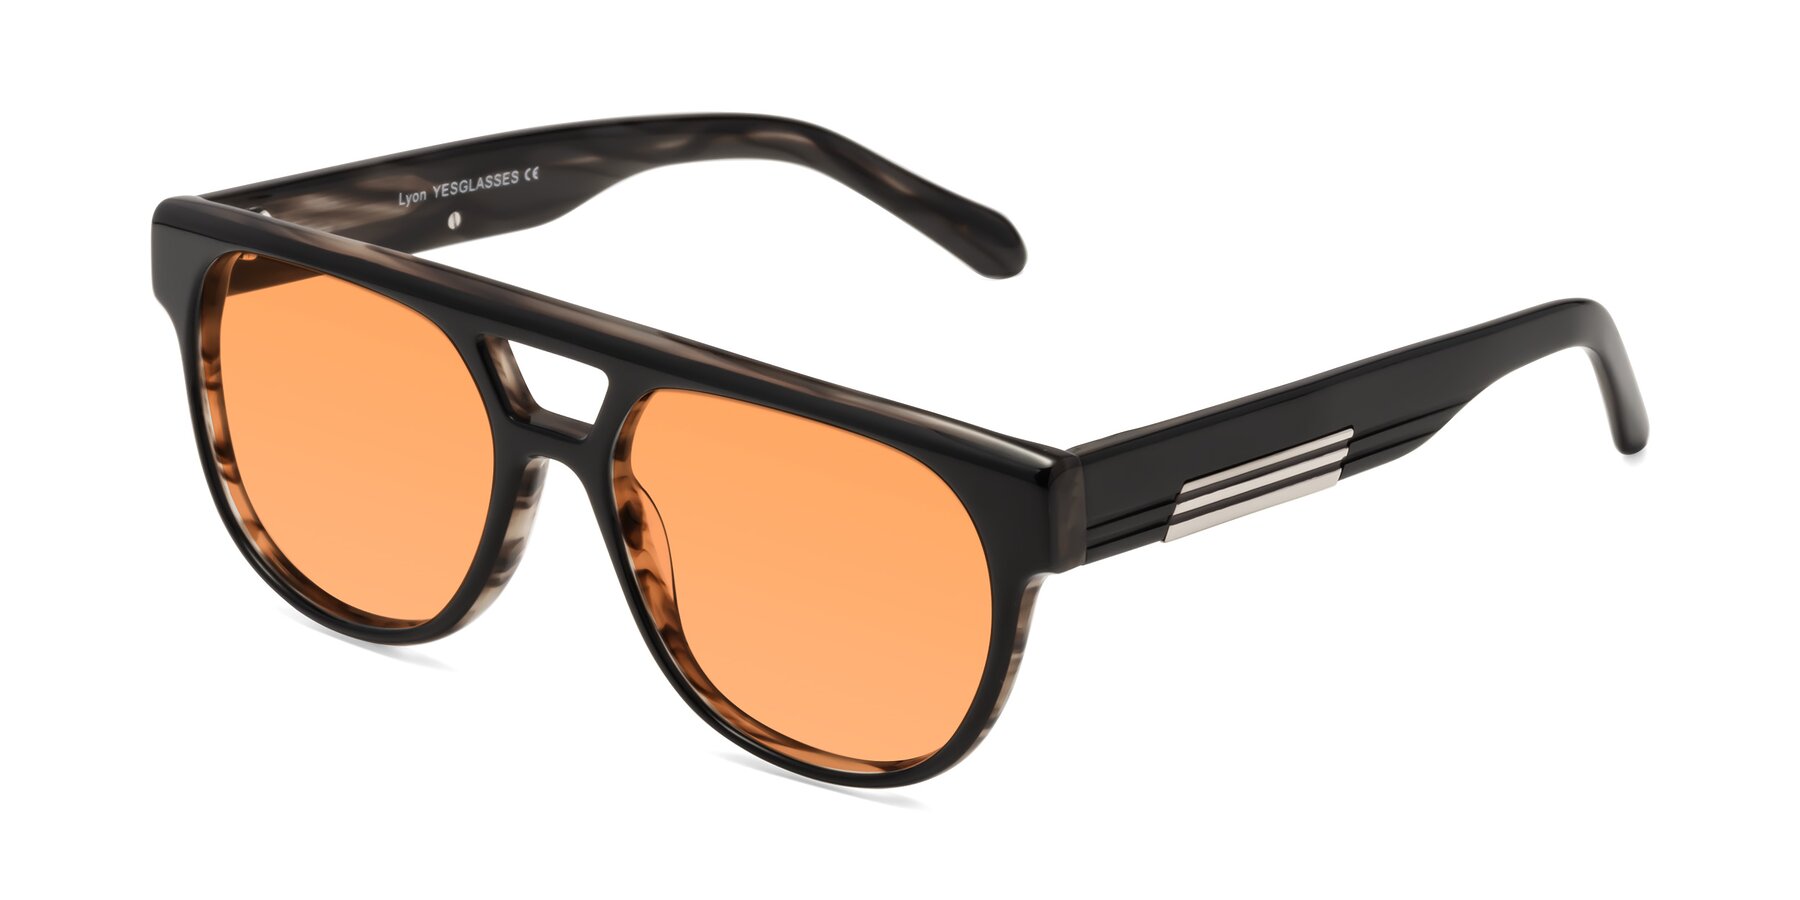 Angle of Lyon in Black-Brown with Medium Orange Tinted Lenses